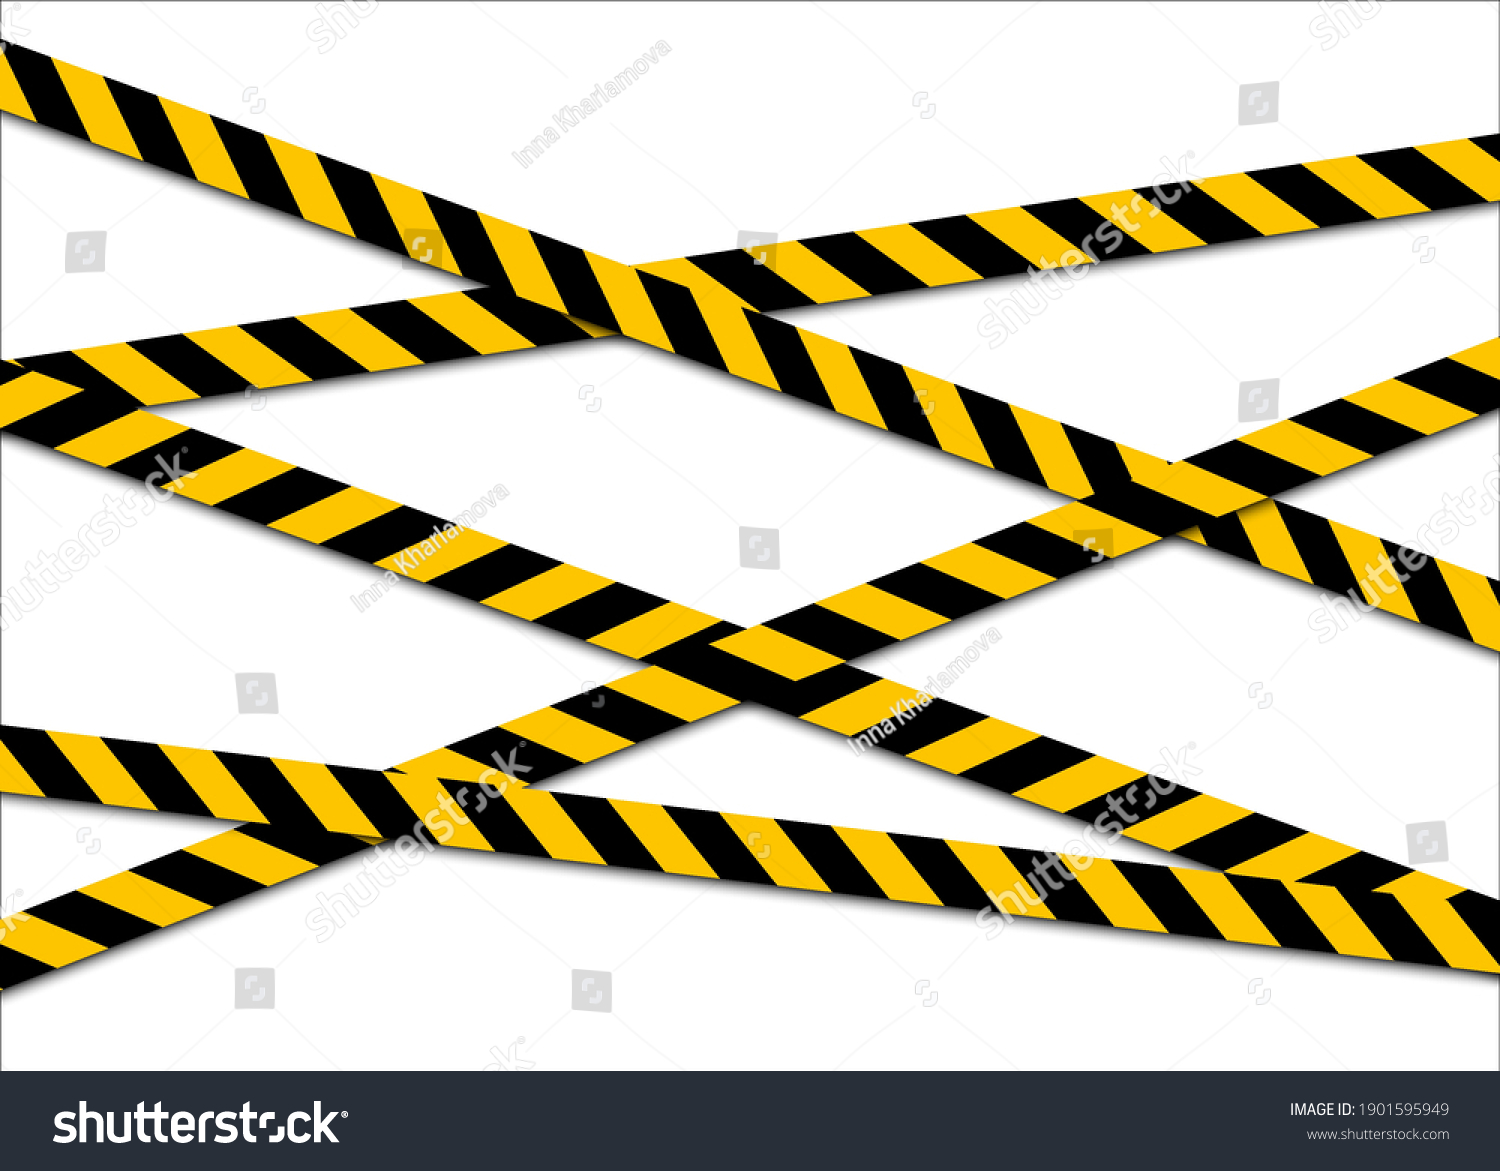 SVG of Set of warning tapes isolated on white background. Yellow with black police line and danger tape. Vector illustration. svg